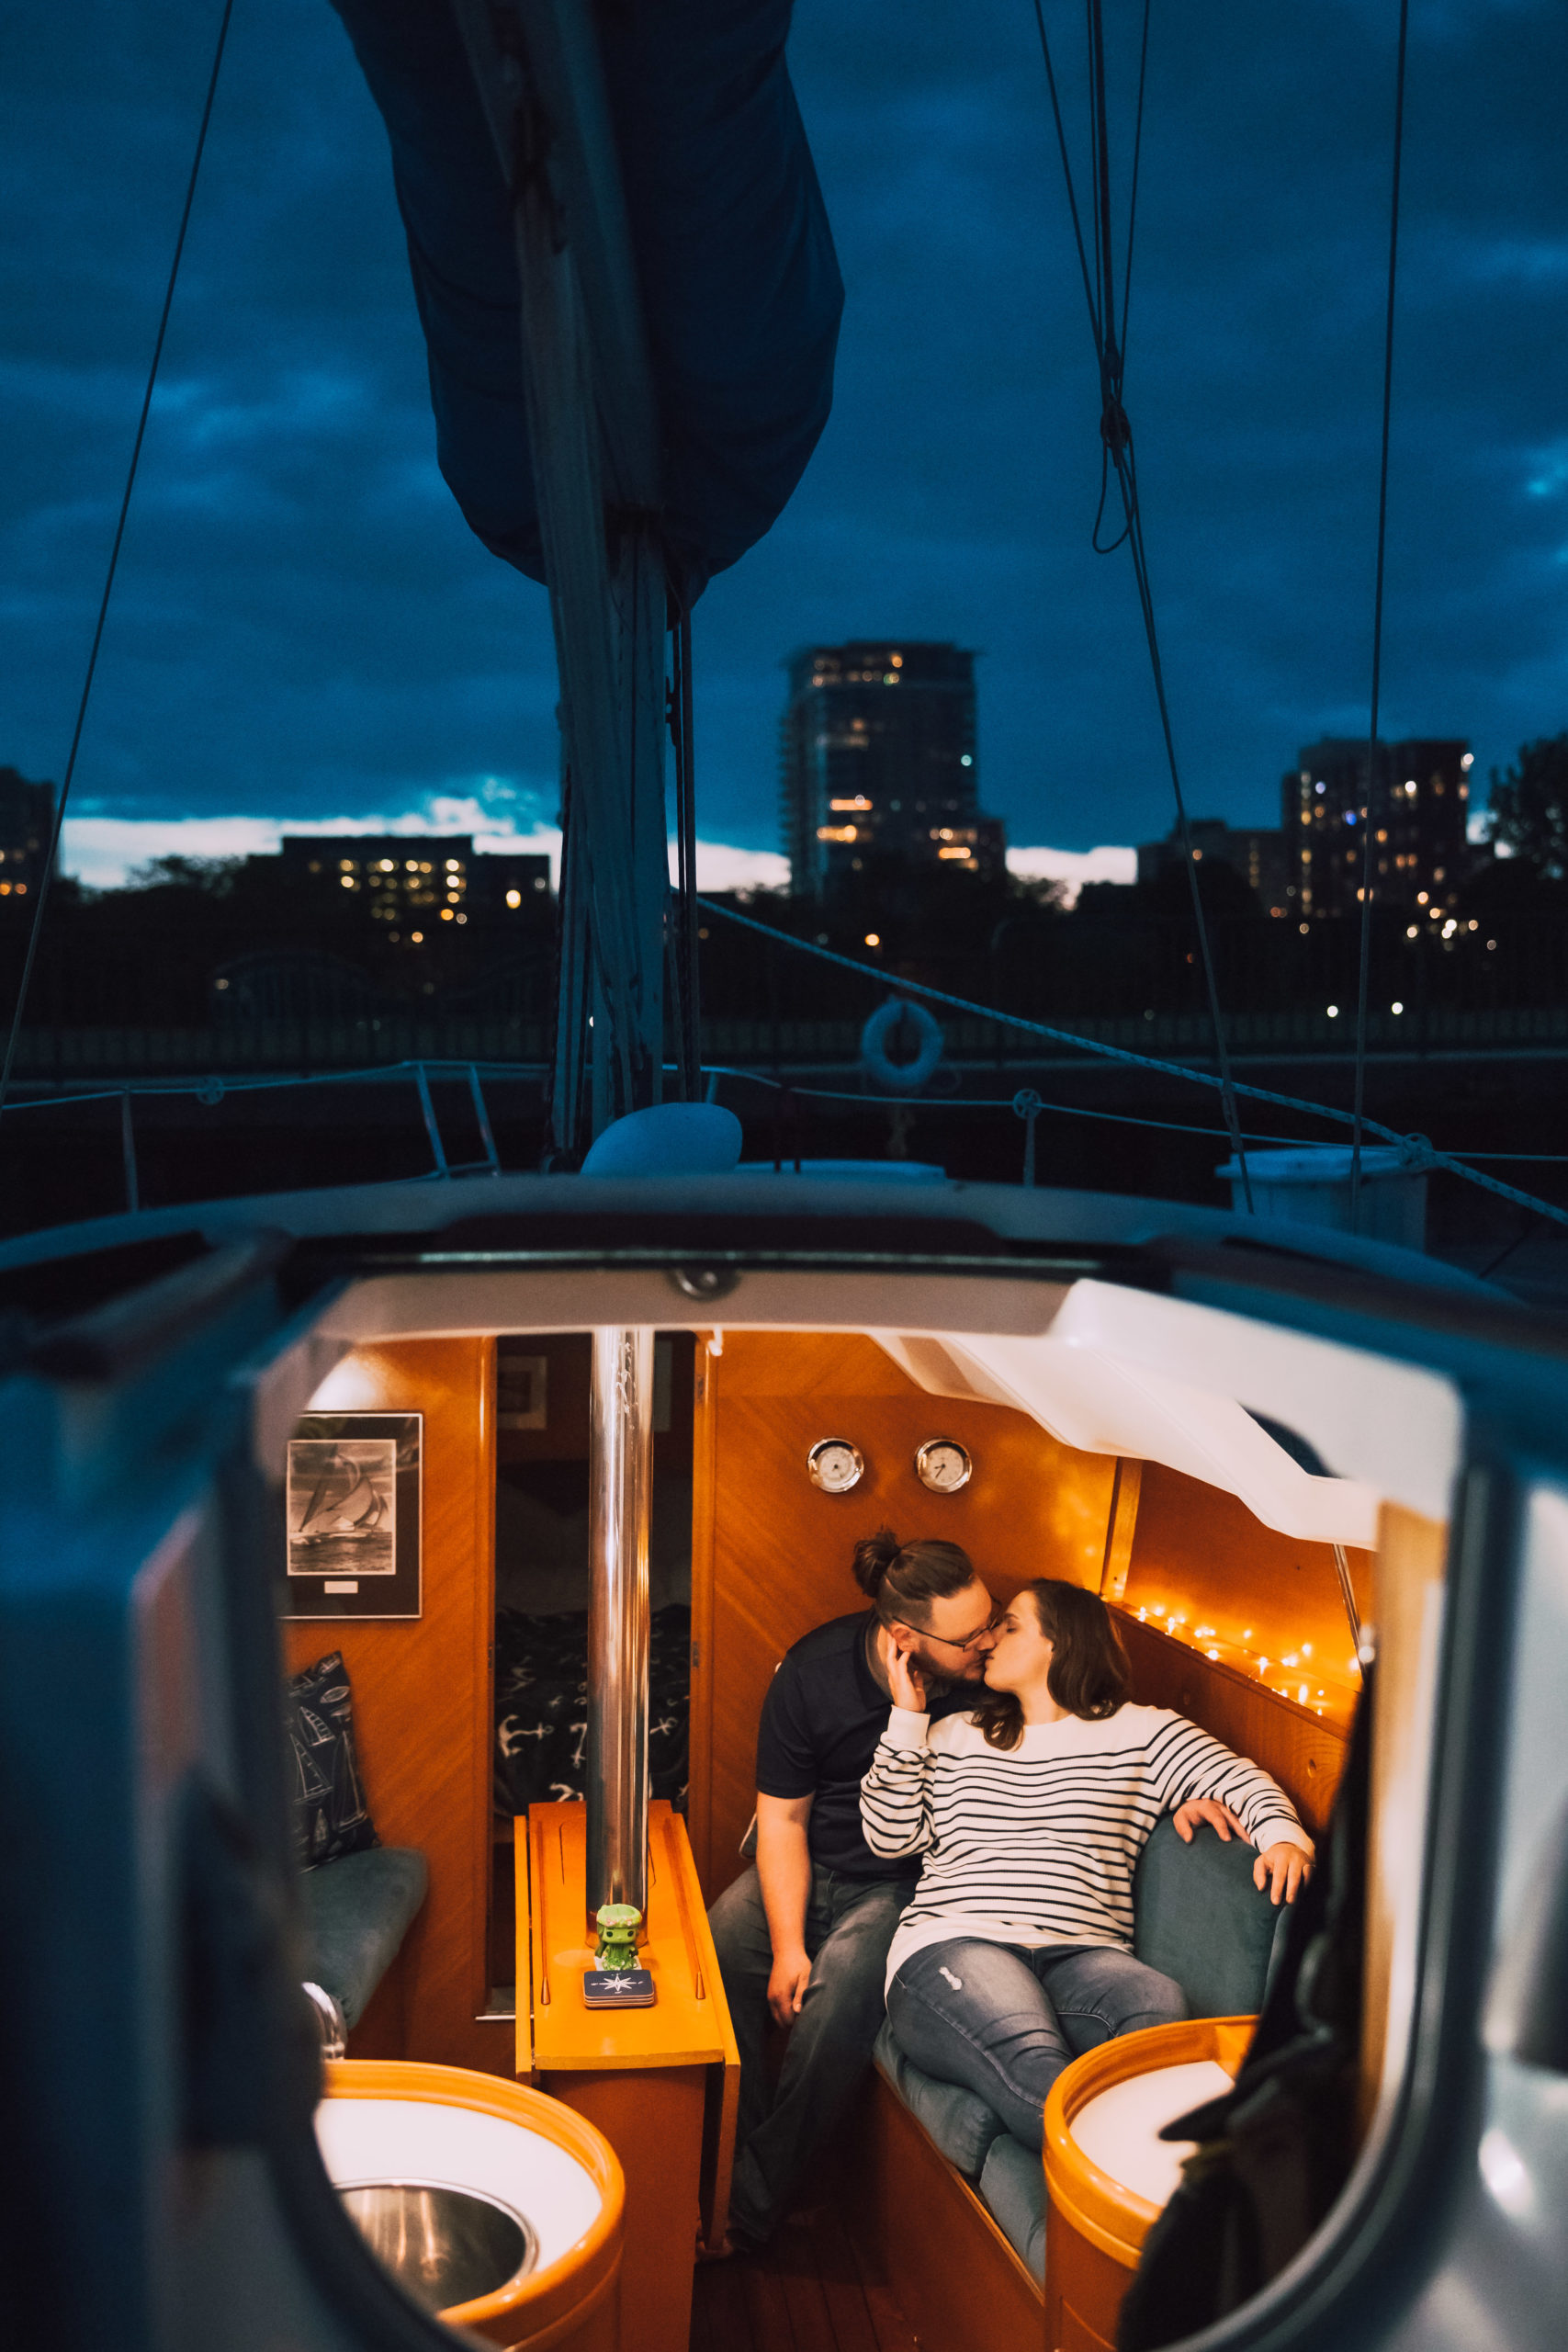 Man and woman kiss inside boat